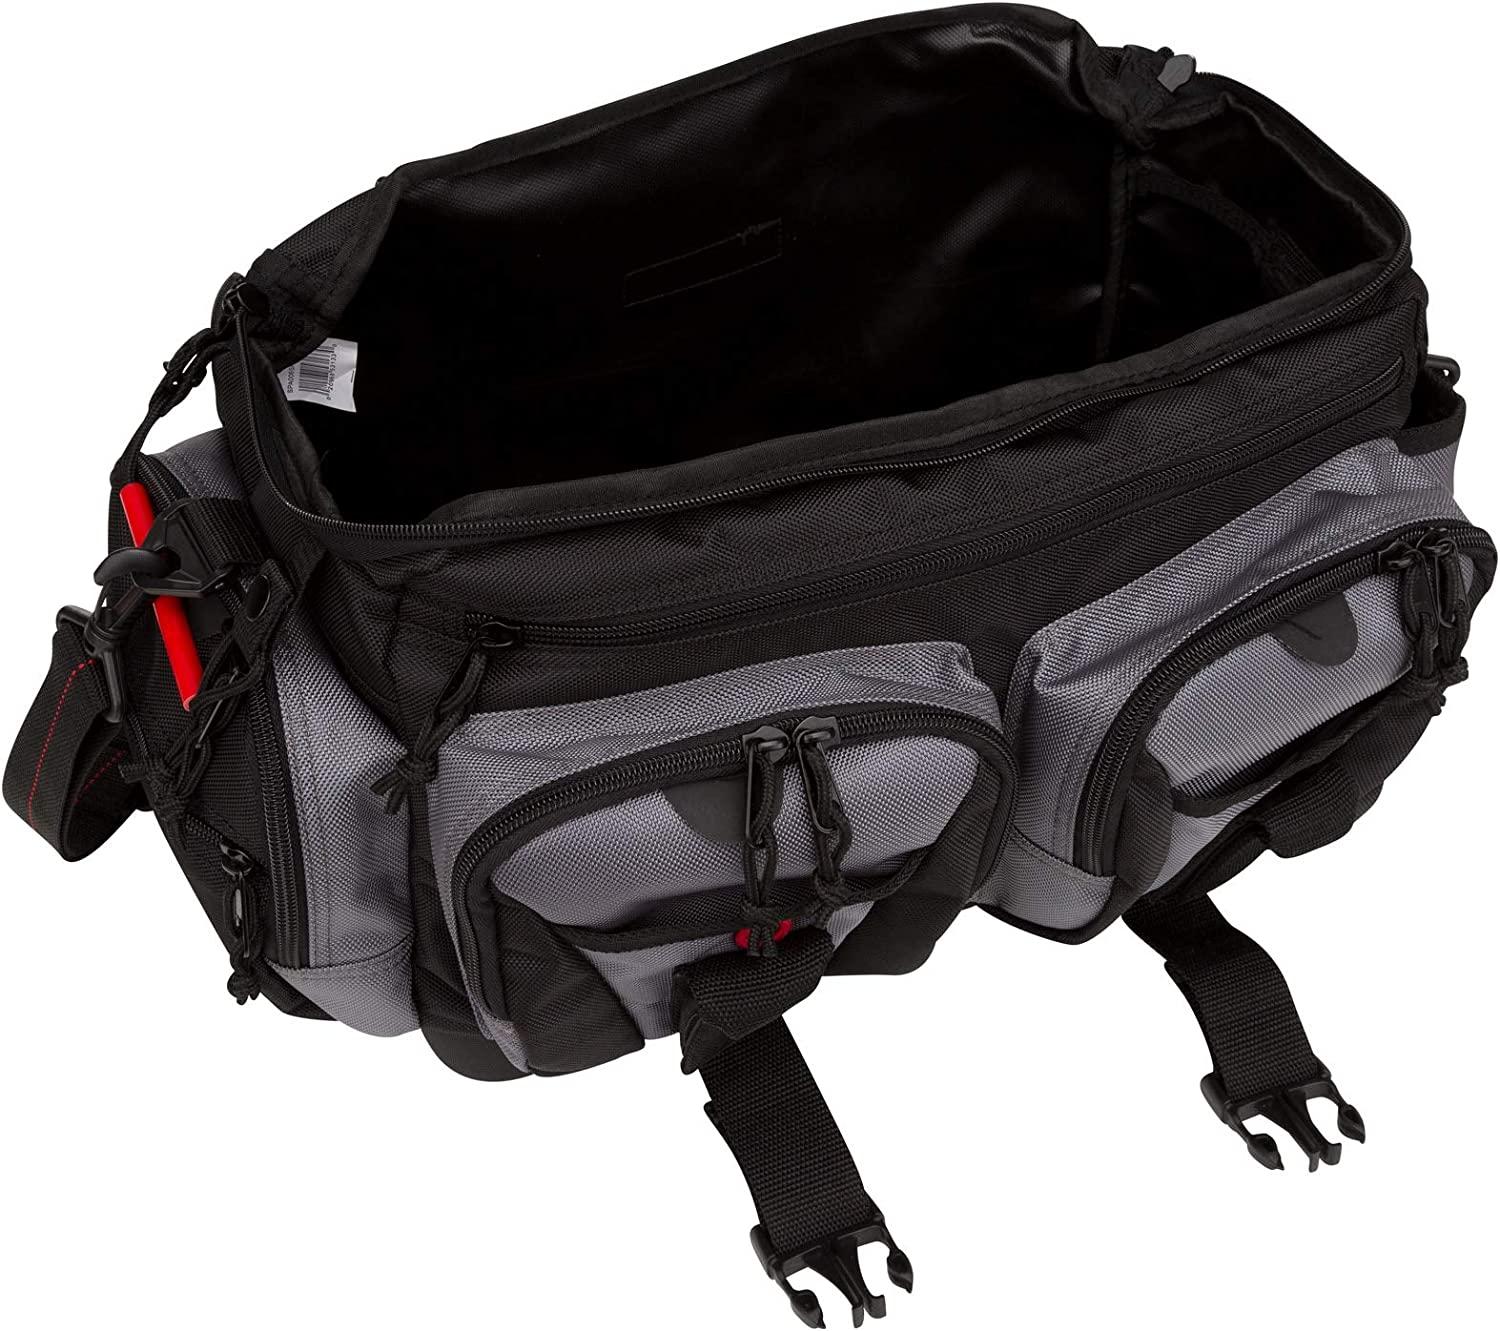 Spider Wire Tackle Bag - Tackle Bags & Boxes